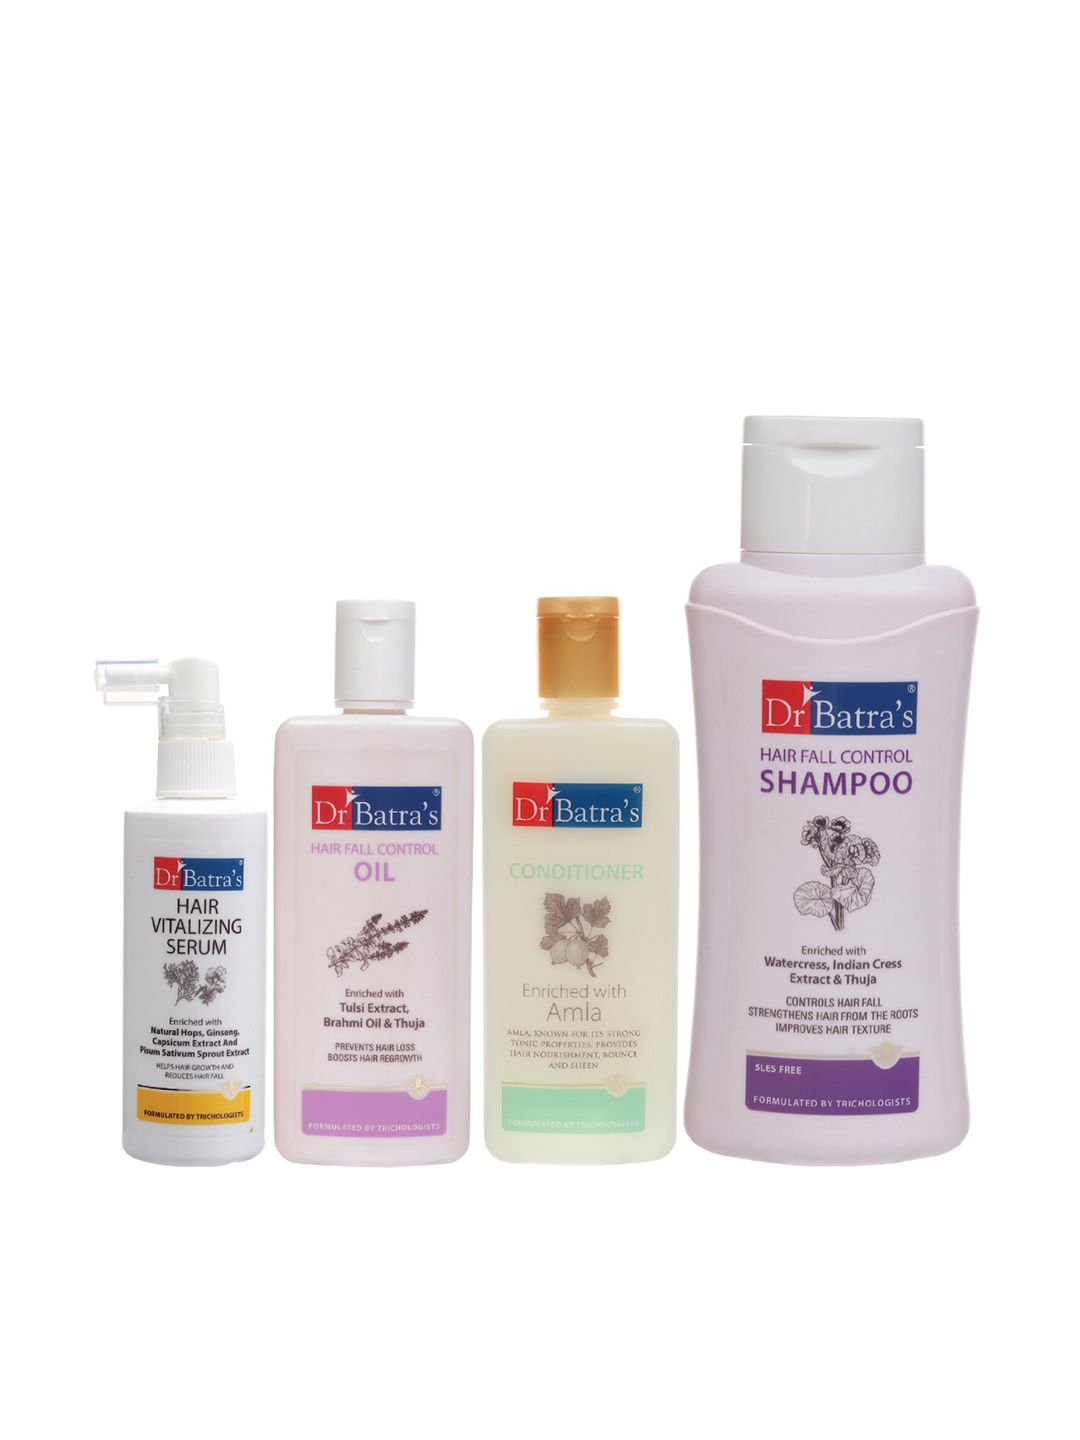 Dr. Batras Unisex Set of 4 Hair Care Kit Price in India